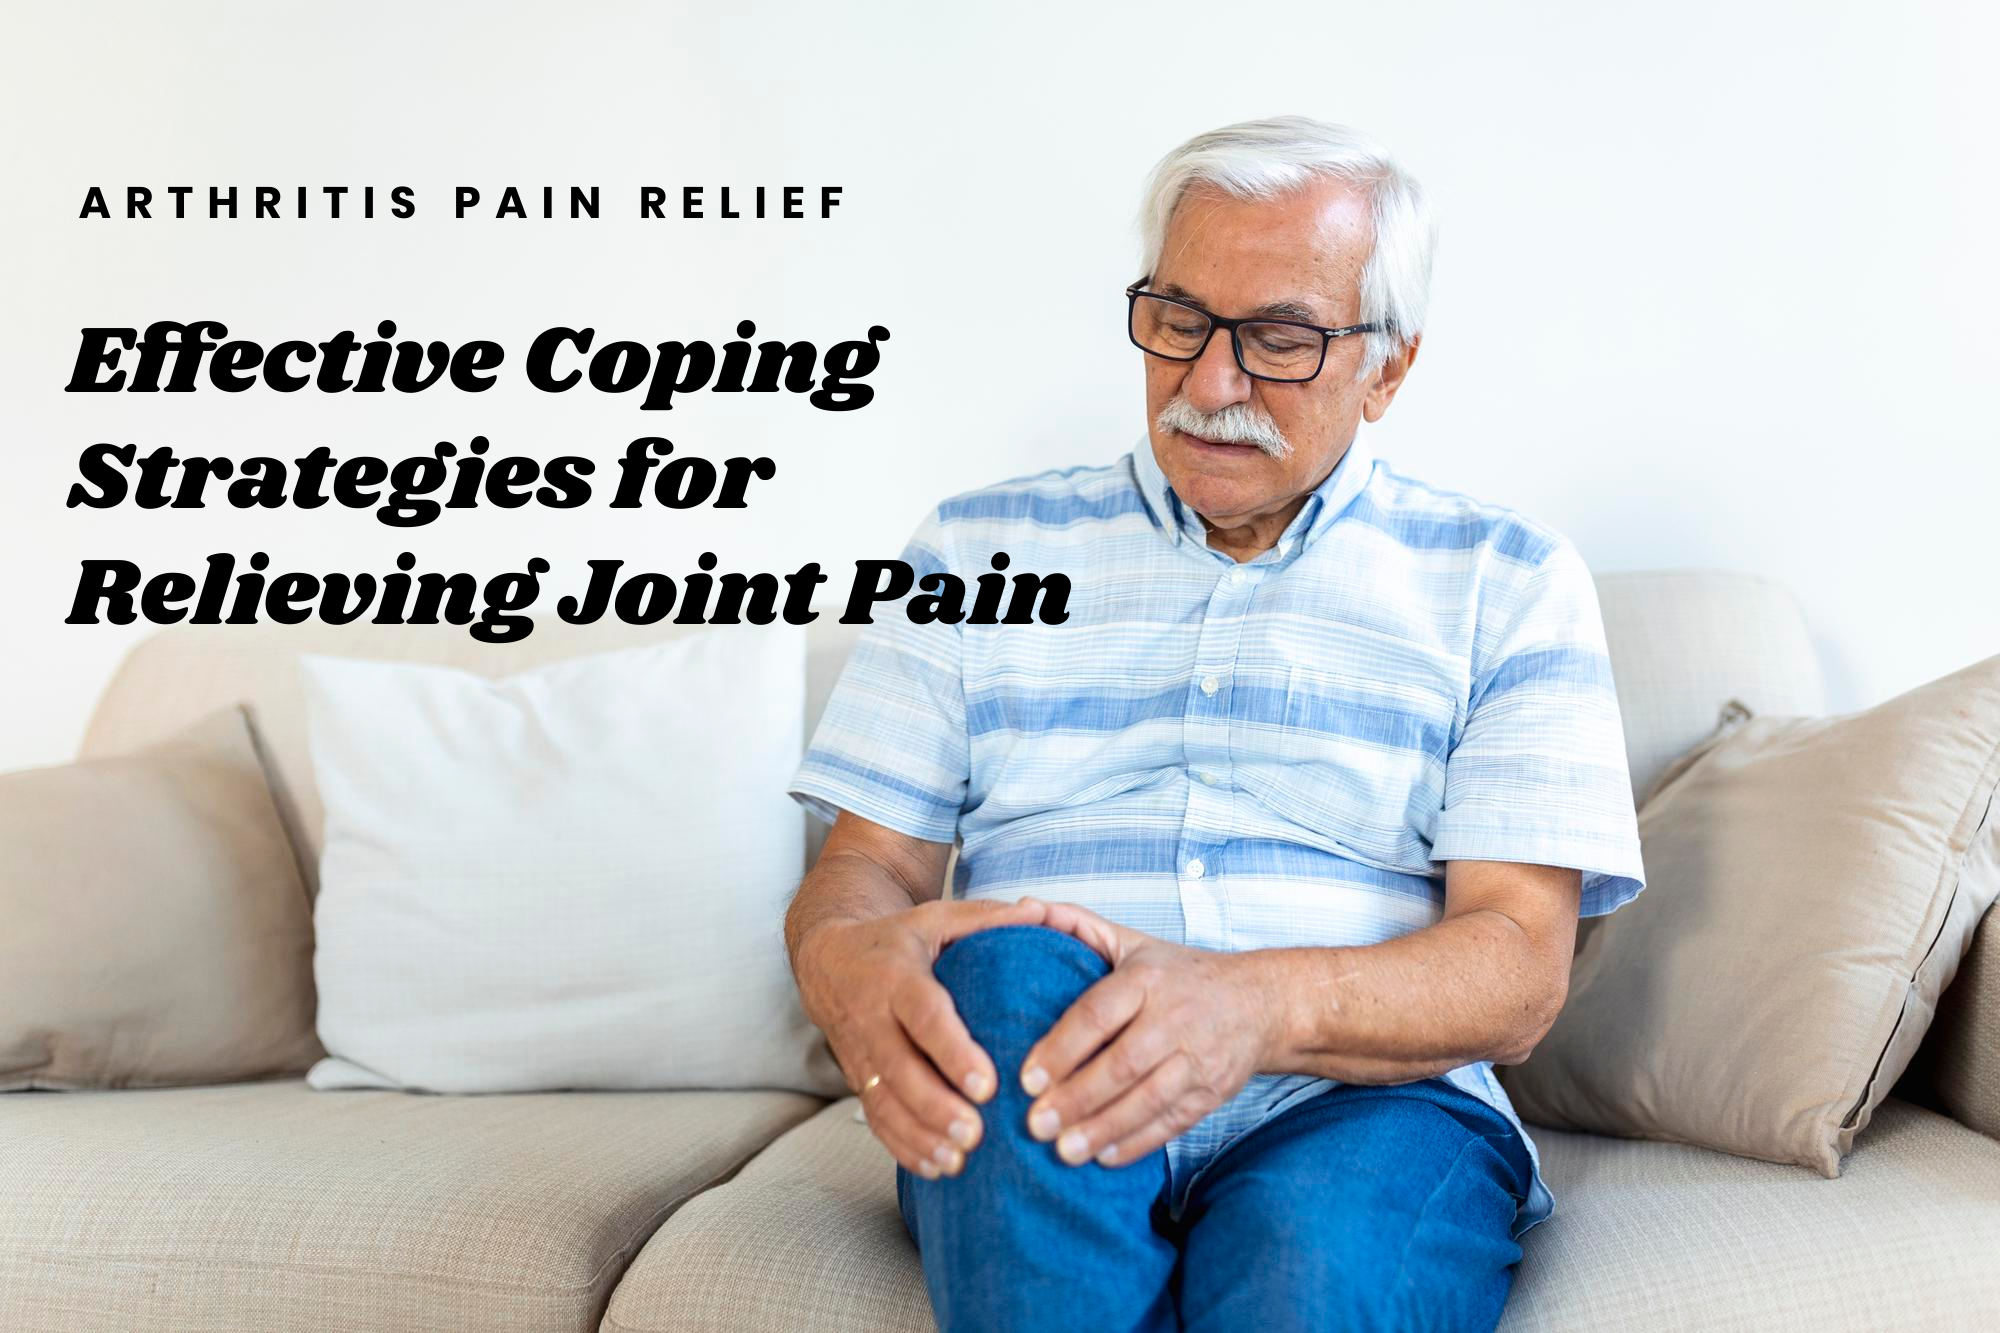 Effective Coping Strategies for relieving Joint Pain